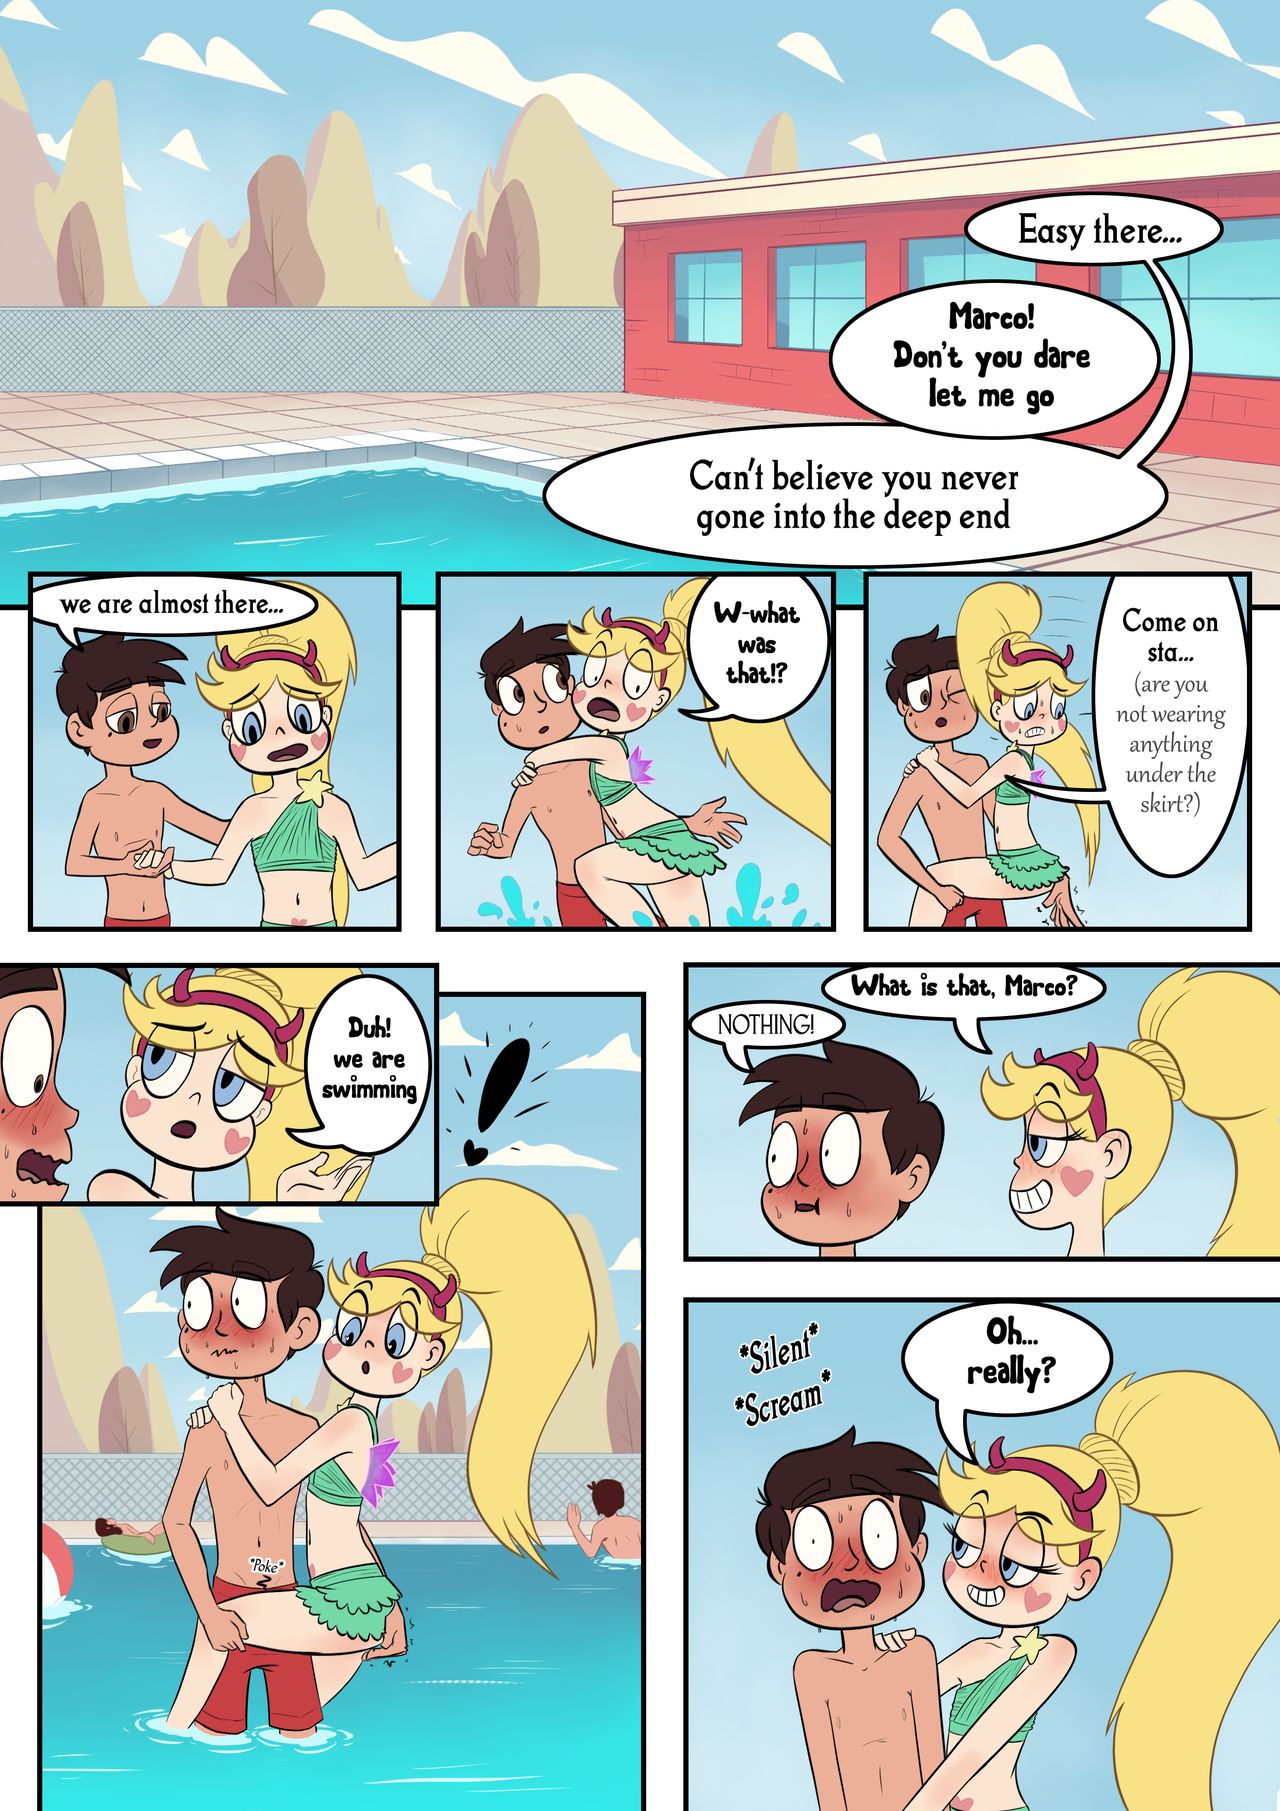 Marco and star porn comic